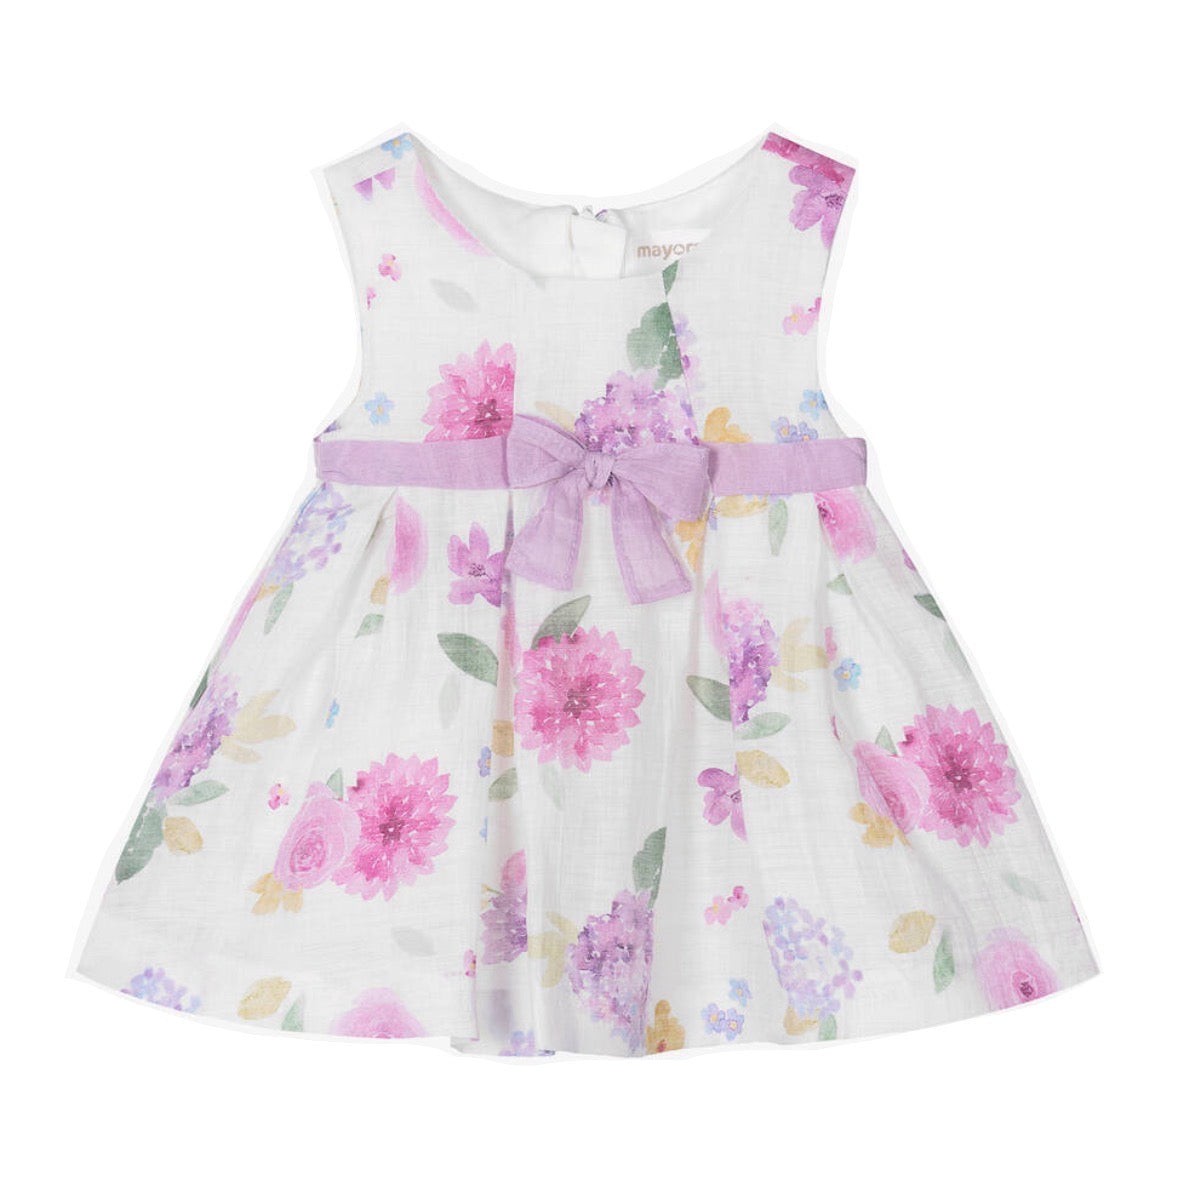 Mayoral Baby Girls Dress 1819 Mauve Floral Clothing 4-6M / Mauve,6-9M / Mauve,12M / Mauve,18M / Mauve